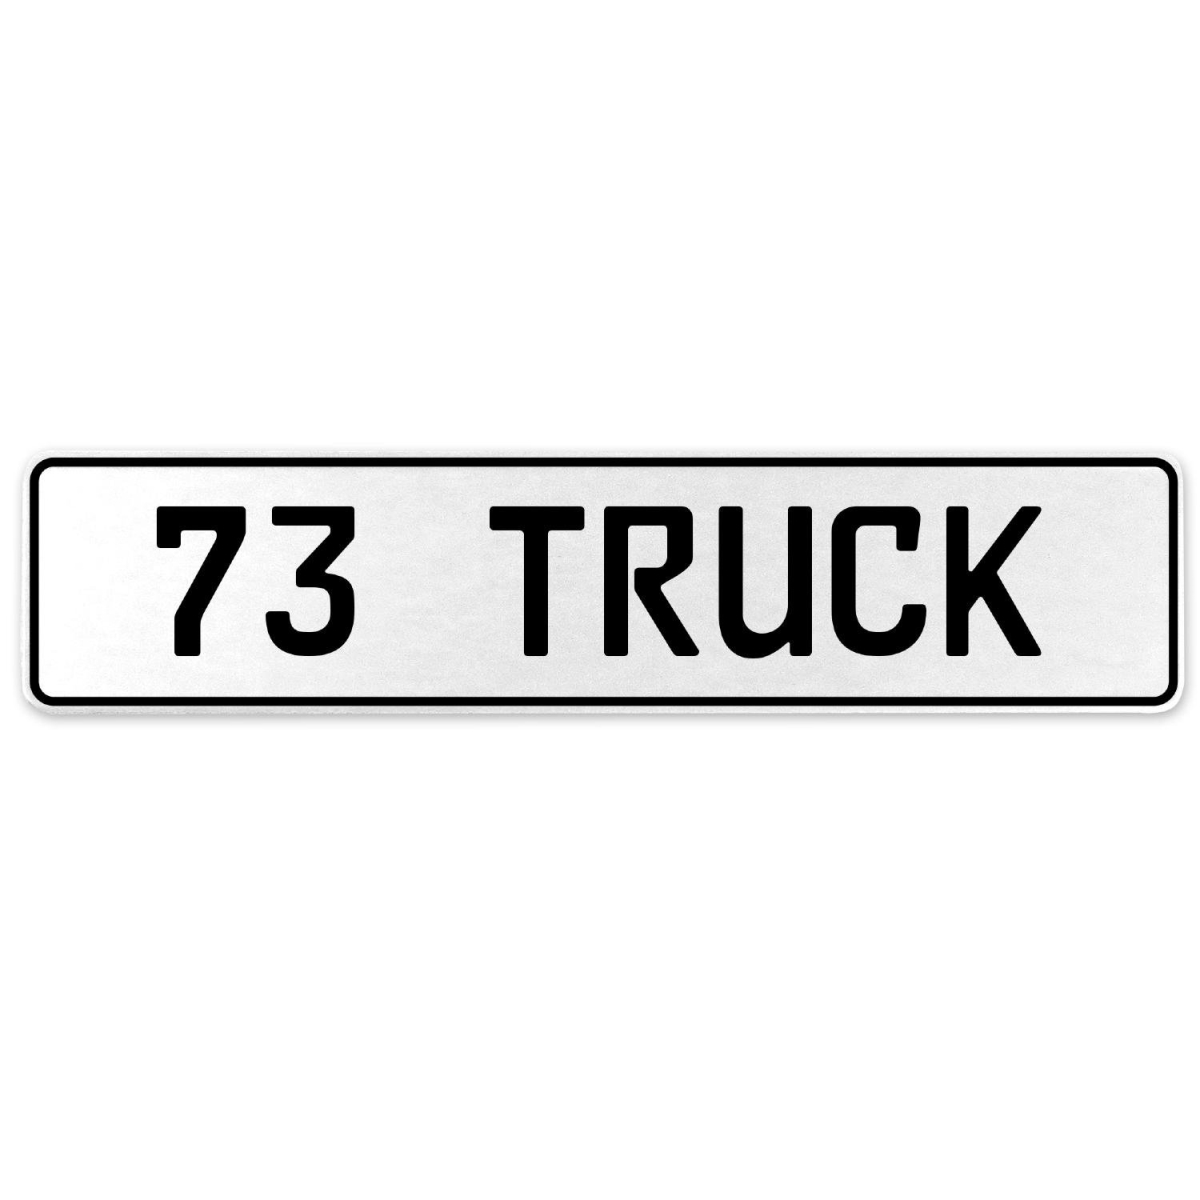 73 Truck - White Aluminum Street Sign Mancave Euro Plate Name Door Sign Wall